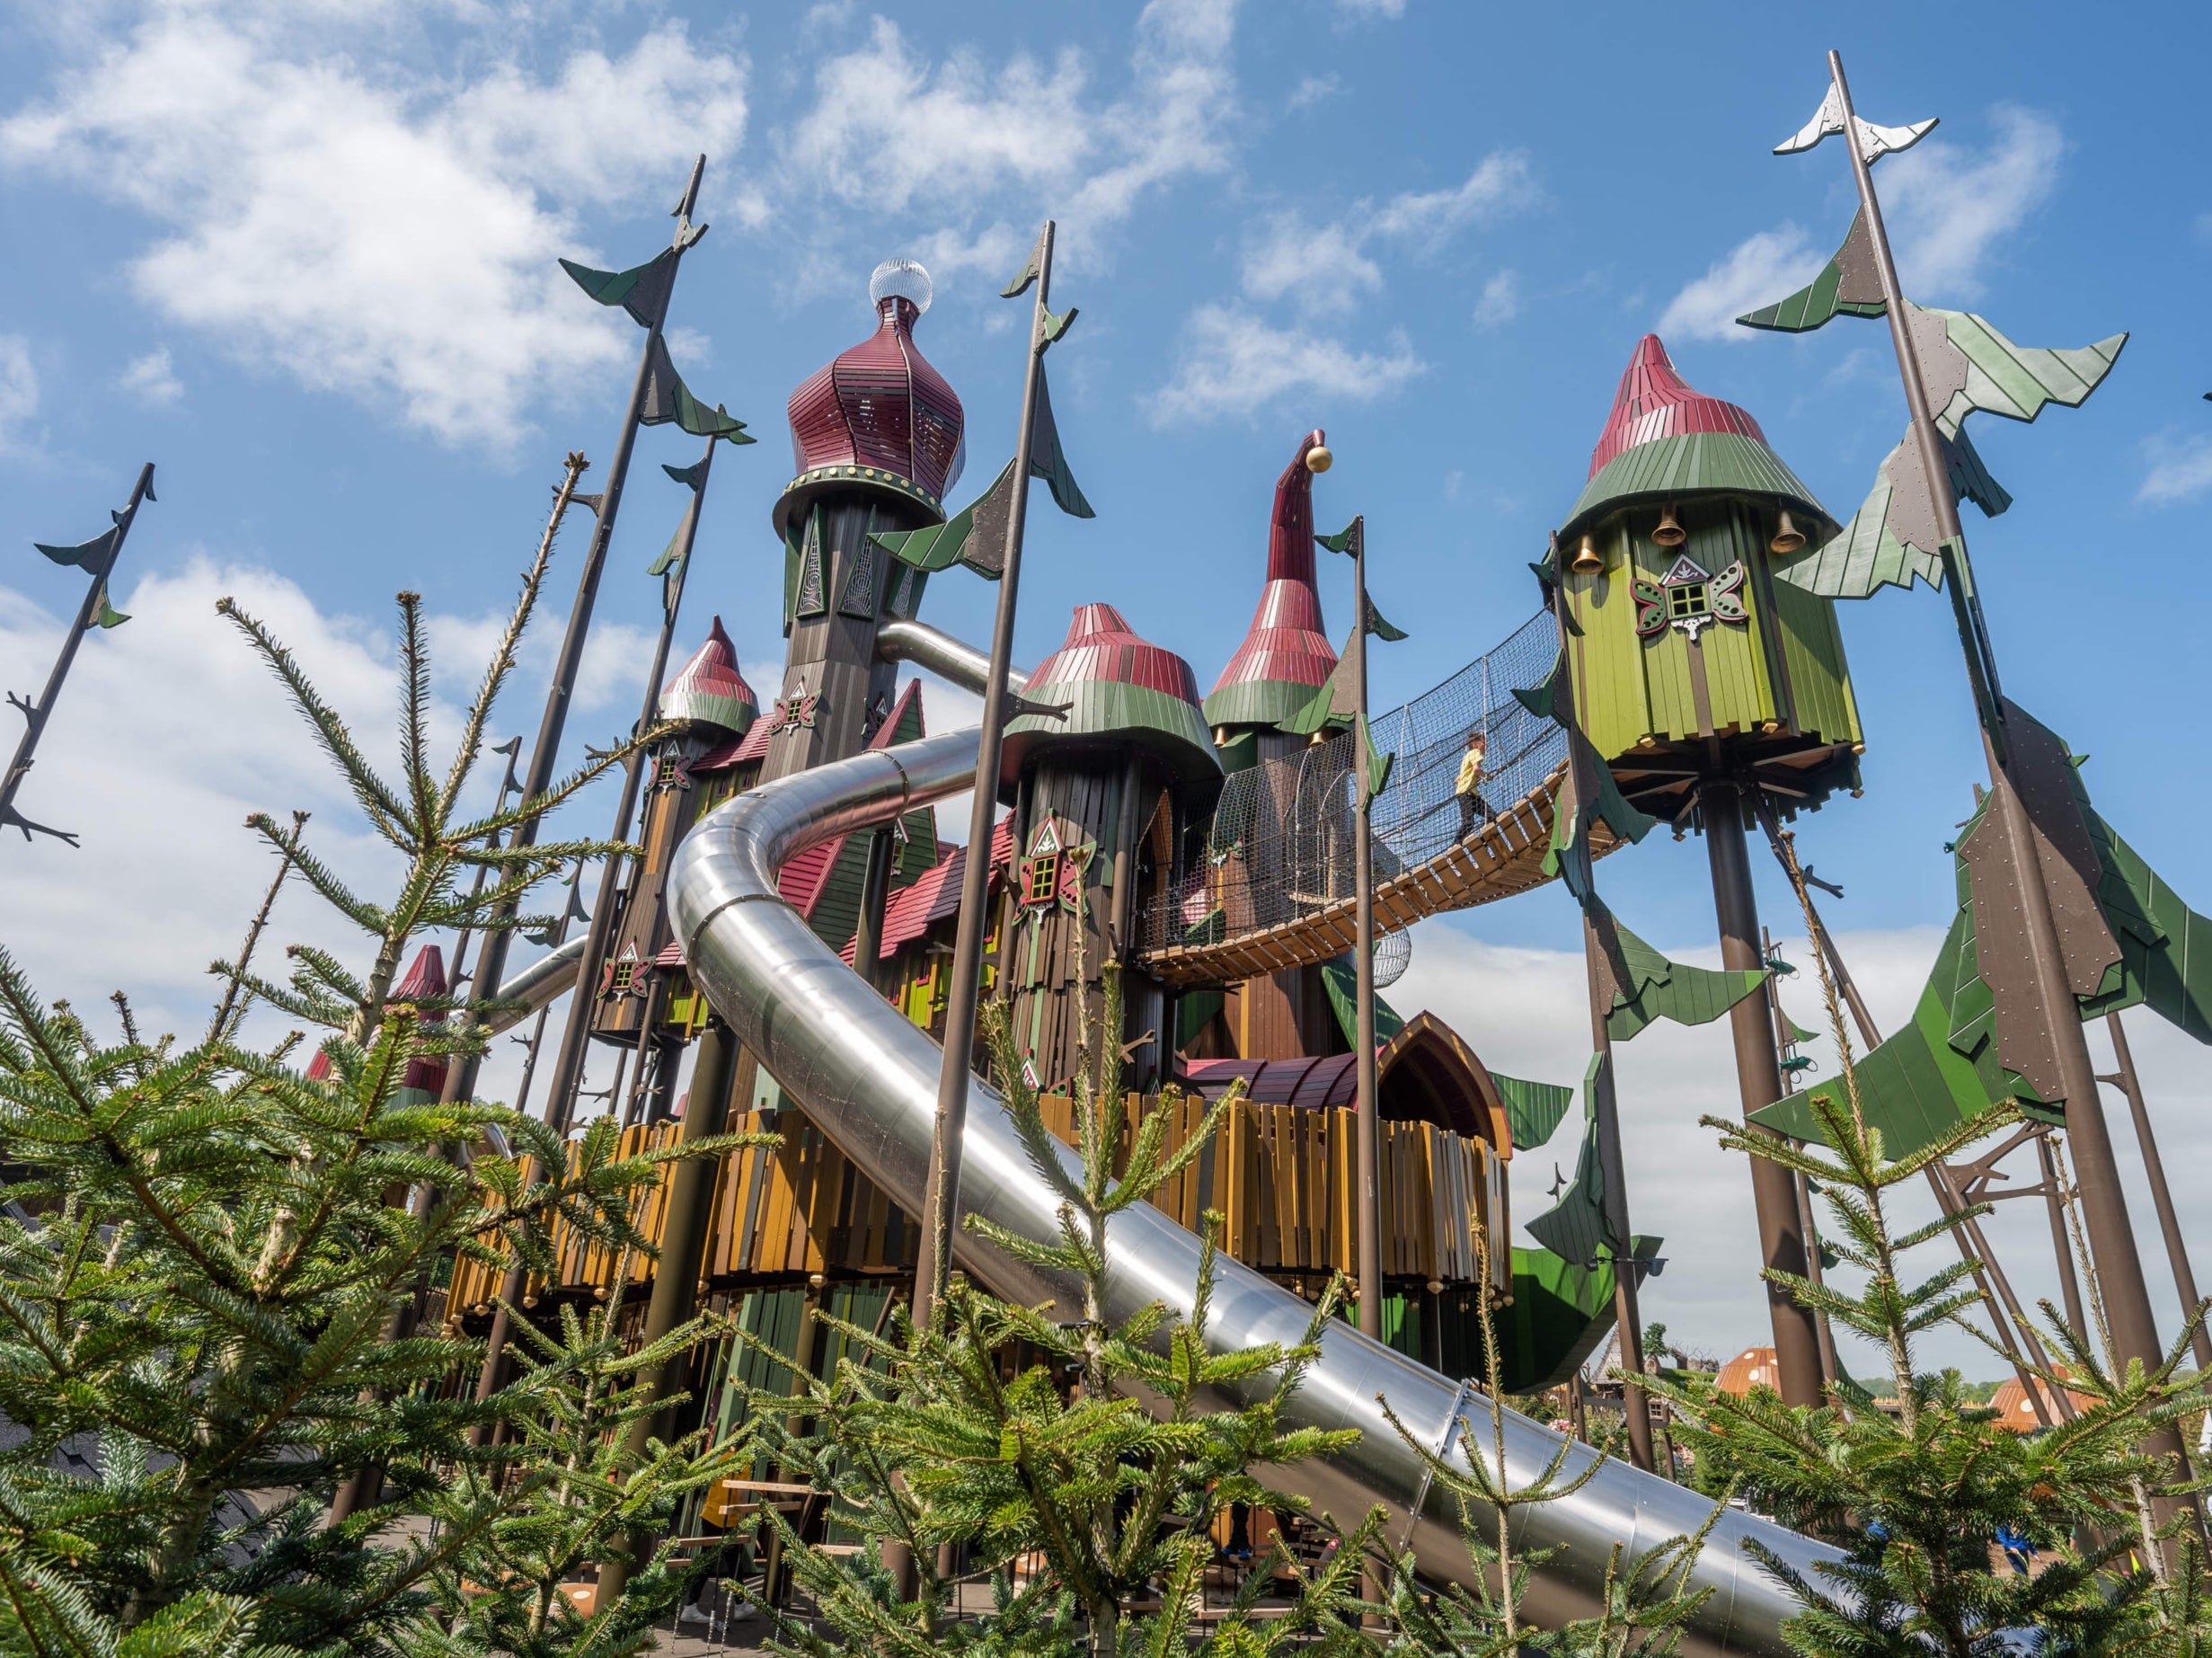 This otherworldy village features the largest play structure in the world